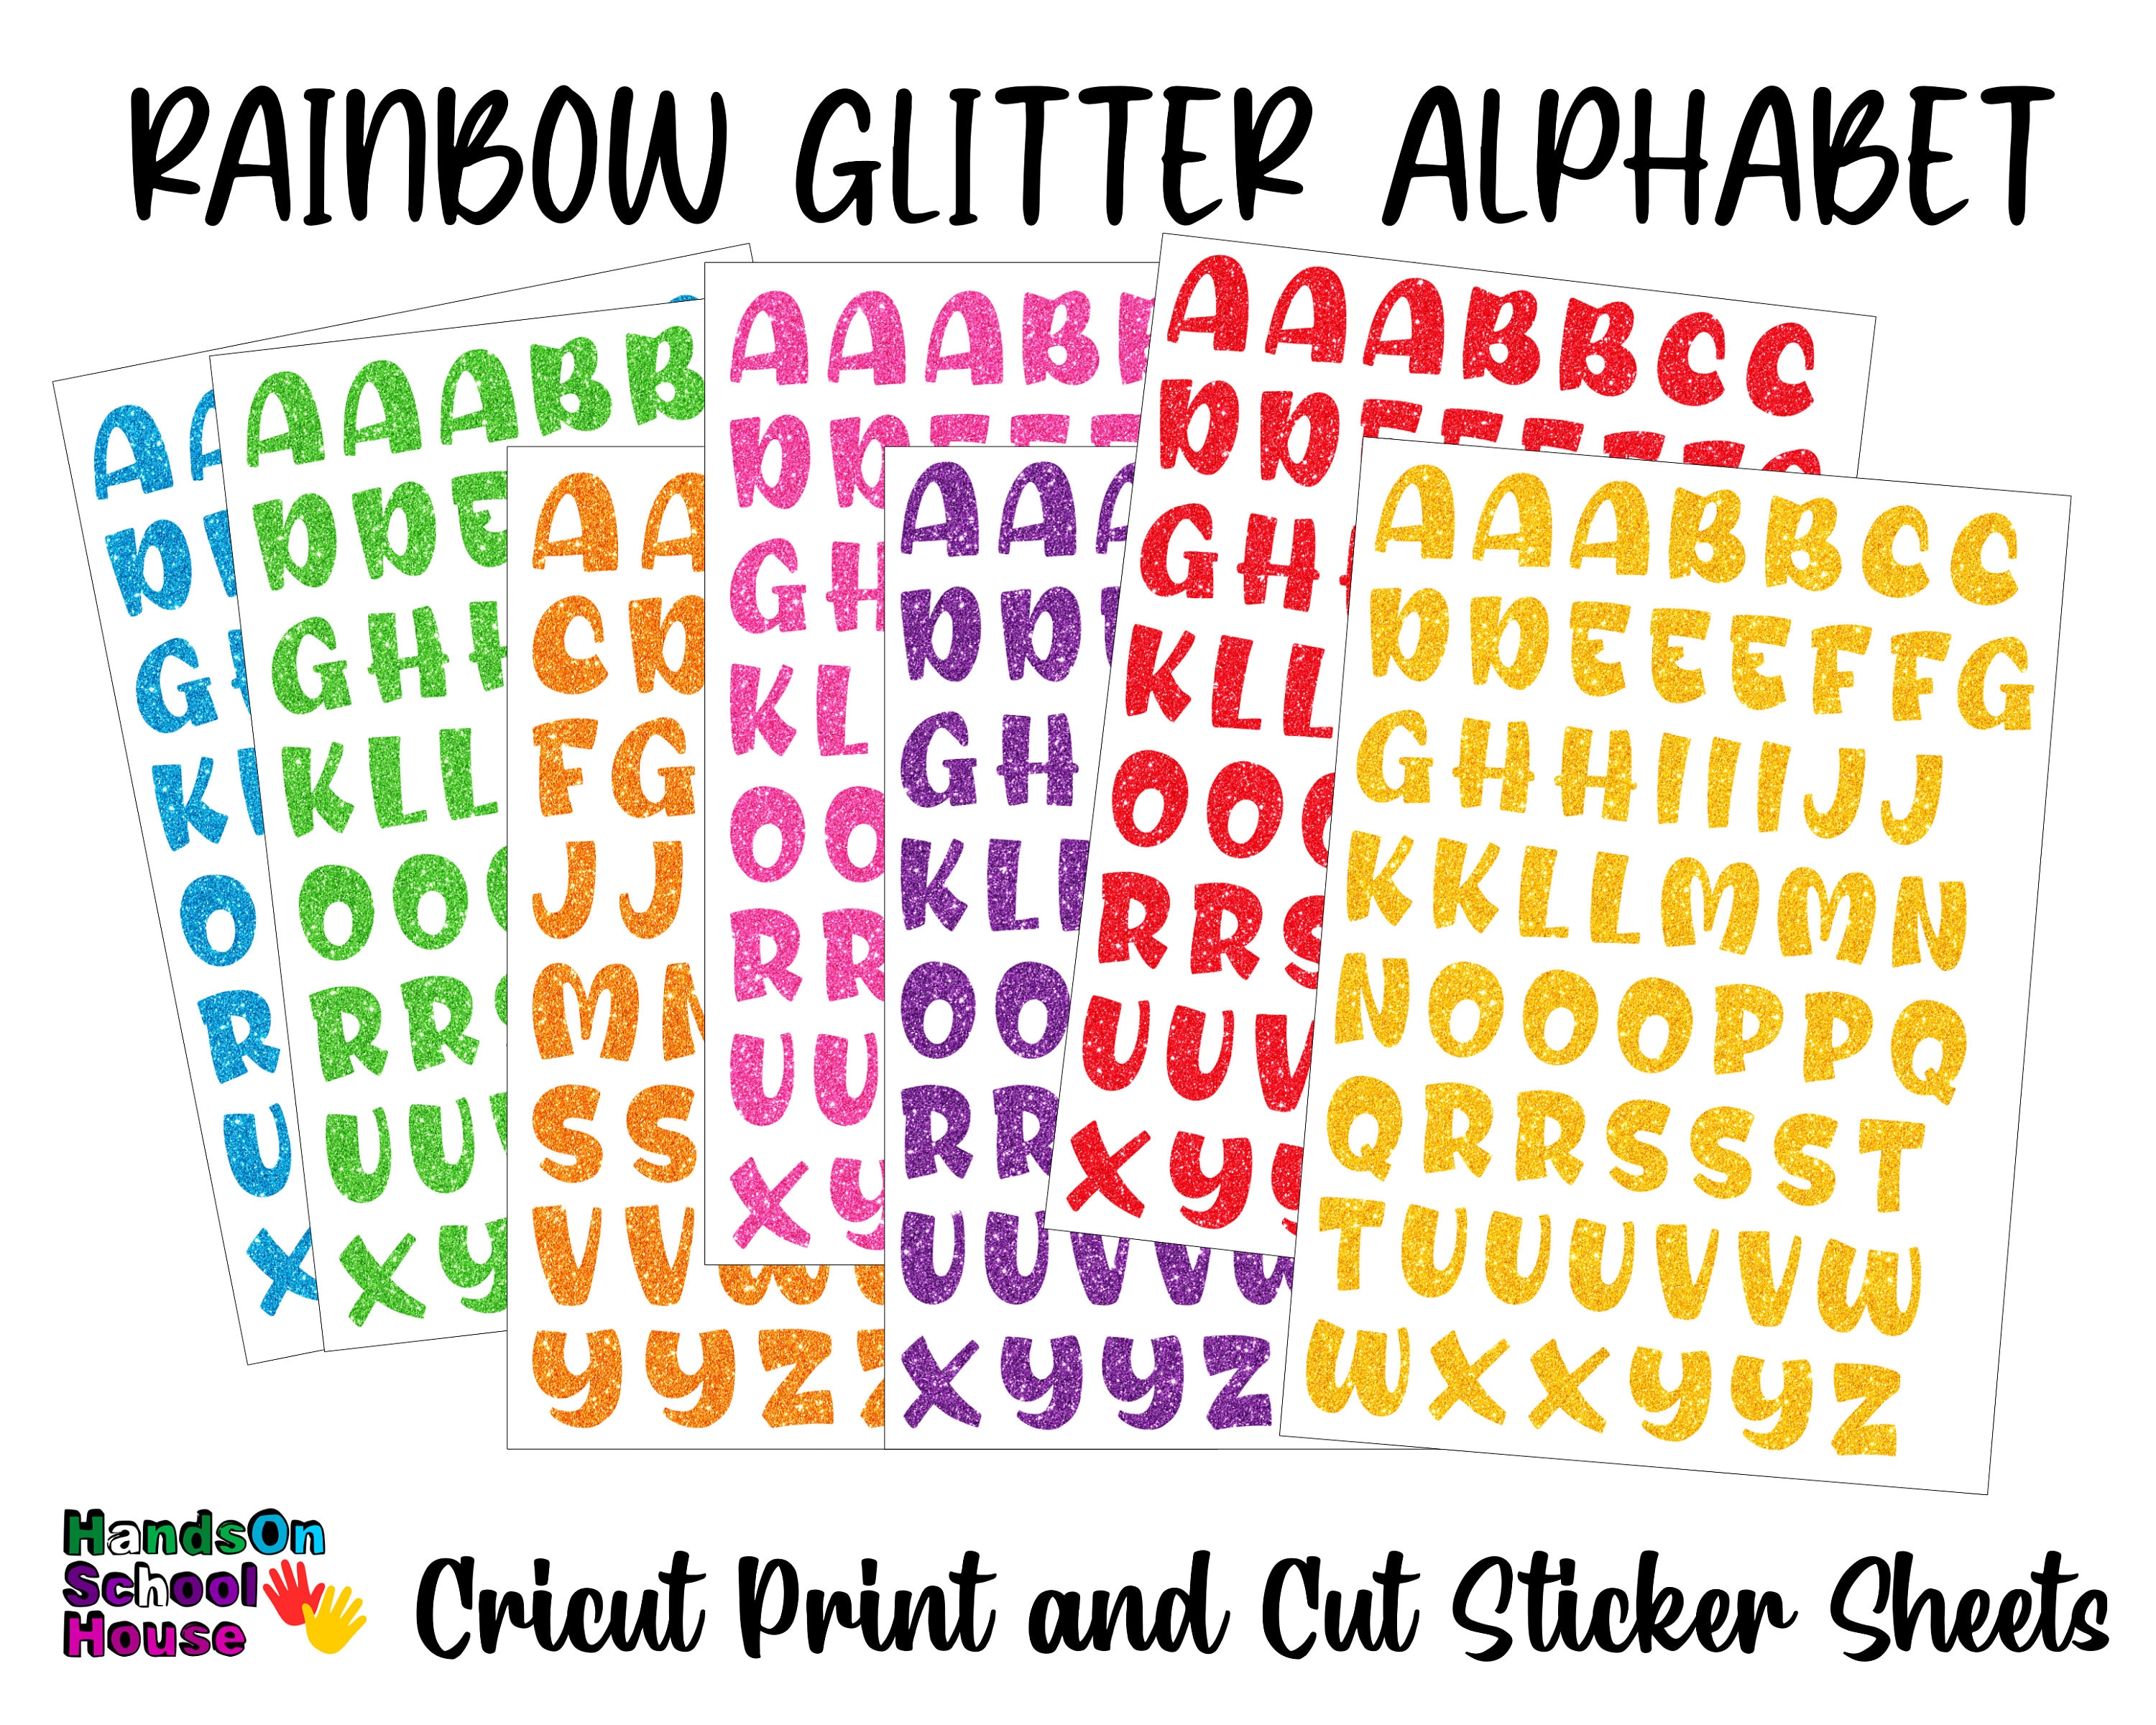 Thin Block Font Glitter Letter Stickers: Red, 305 pc –